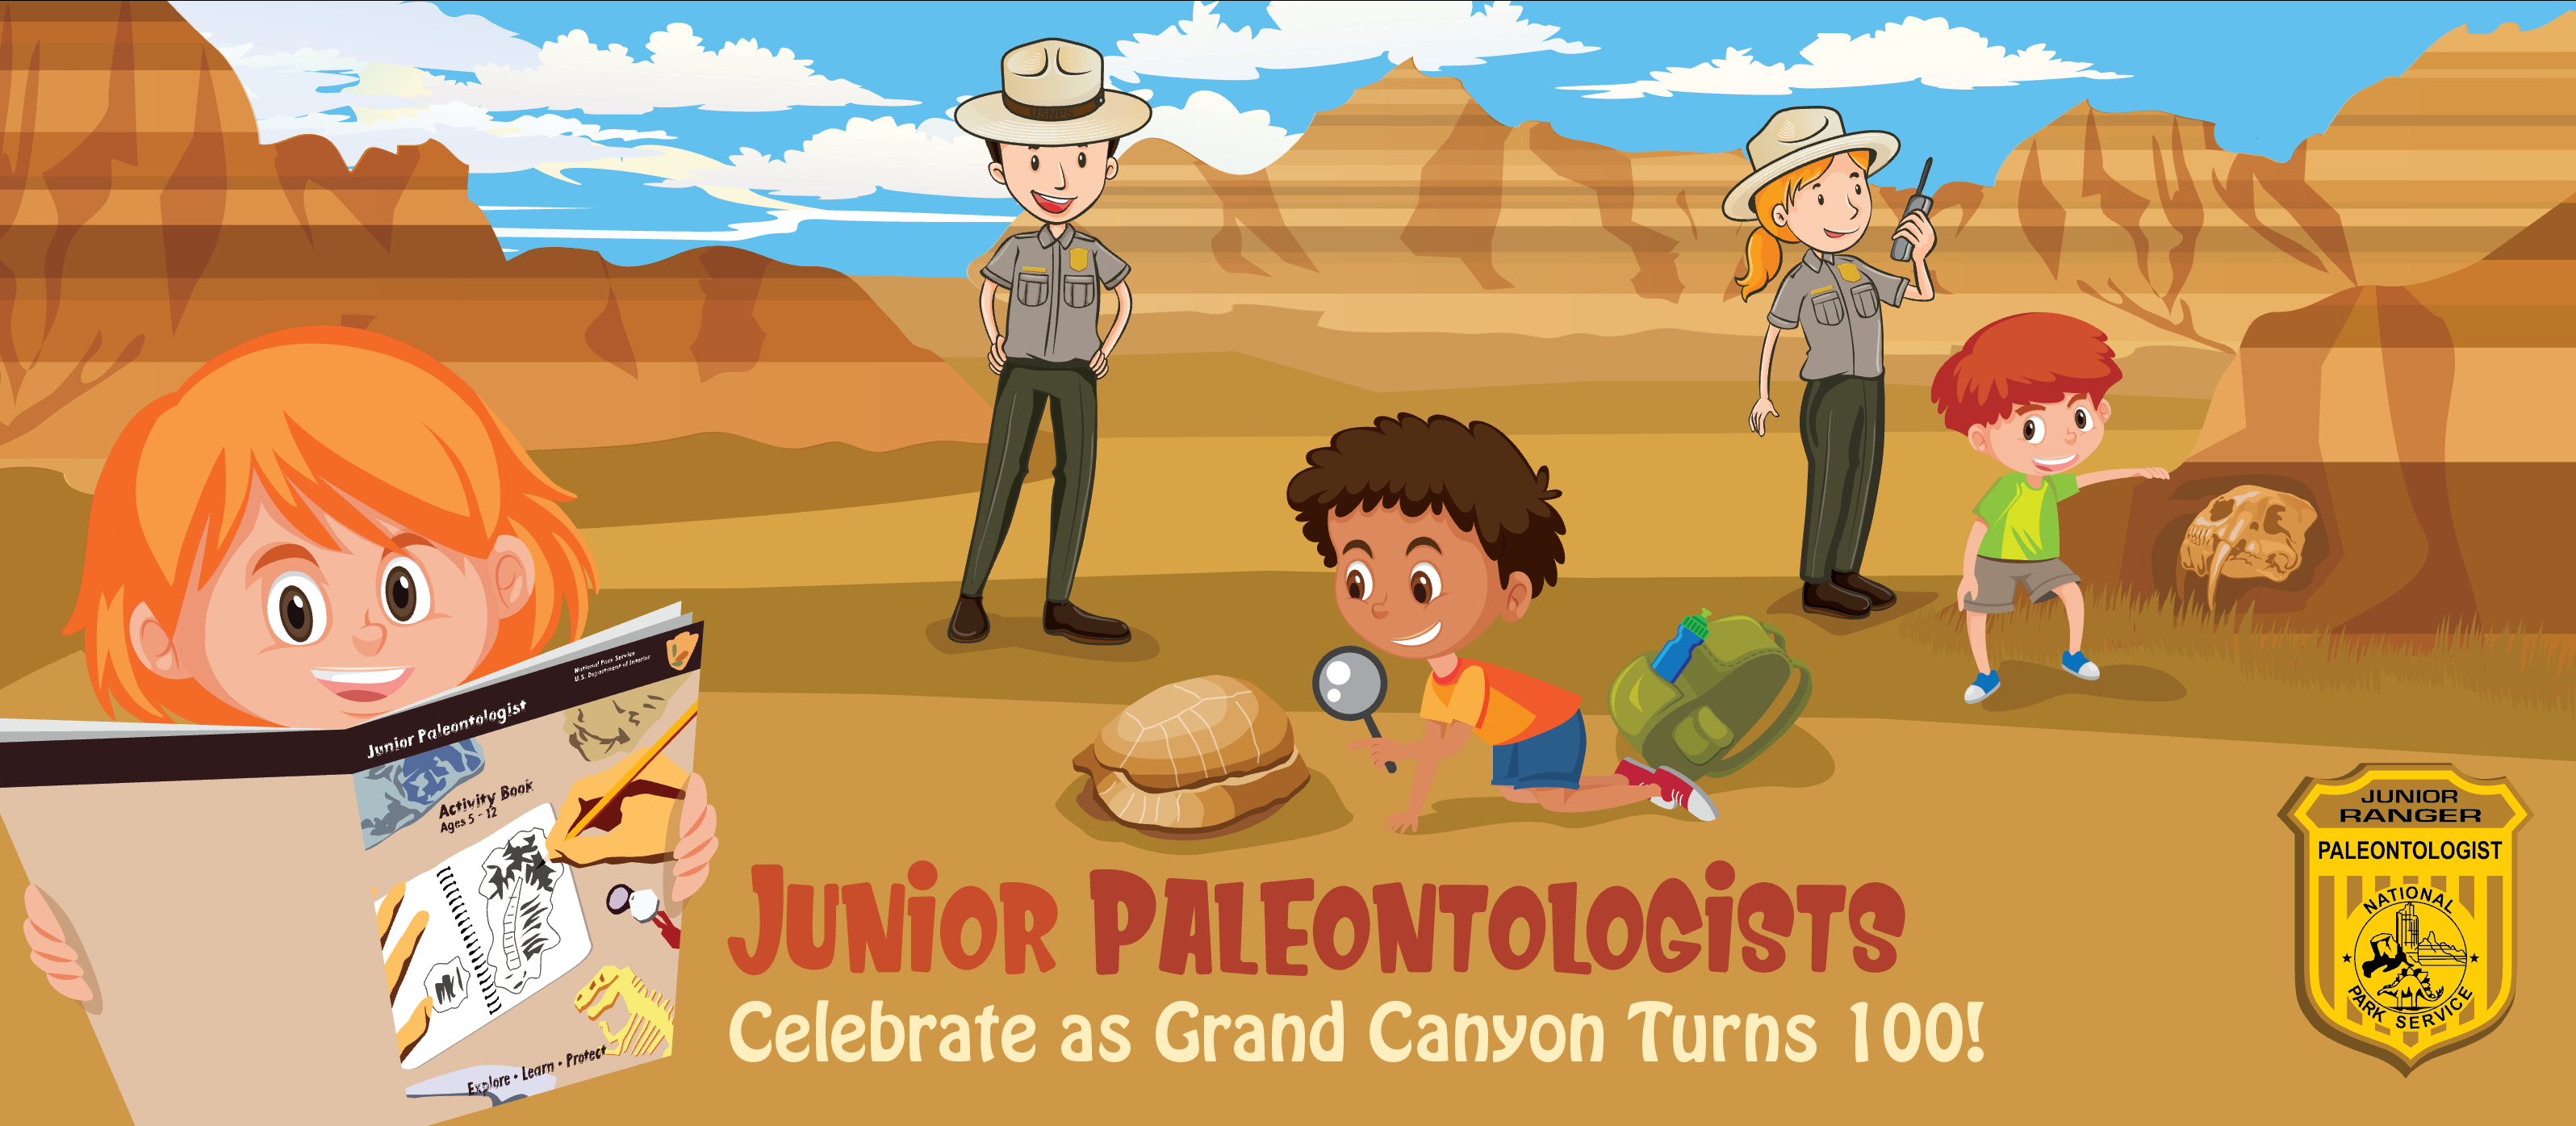 Cartoon children discover fossil while a park ranger overlooks